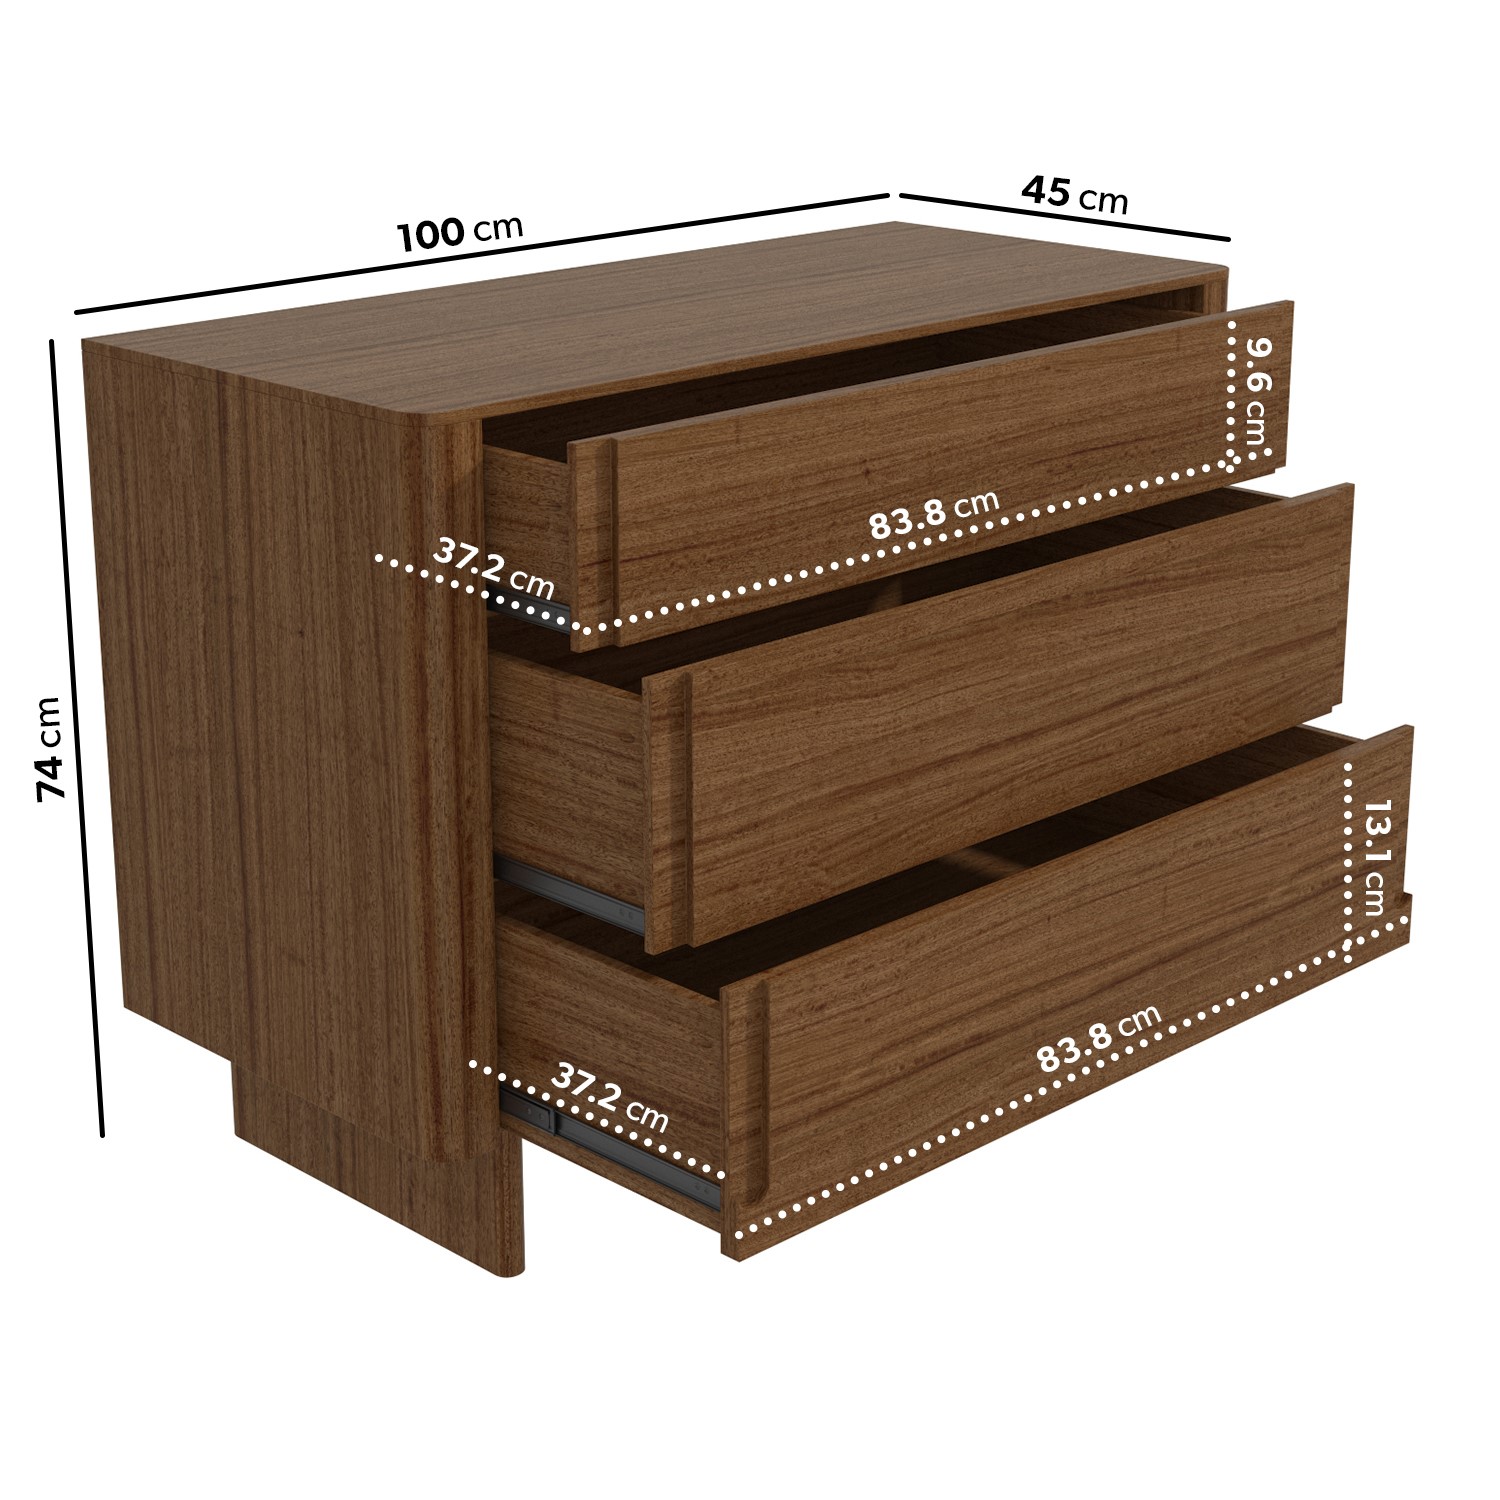 Read more about Dark wood mid century chest of 3 drawers emile sustainable furniture